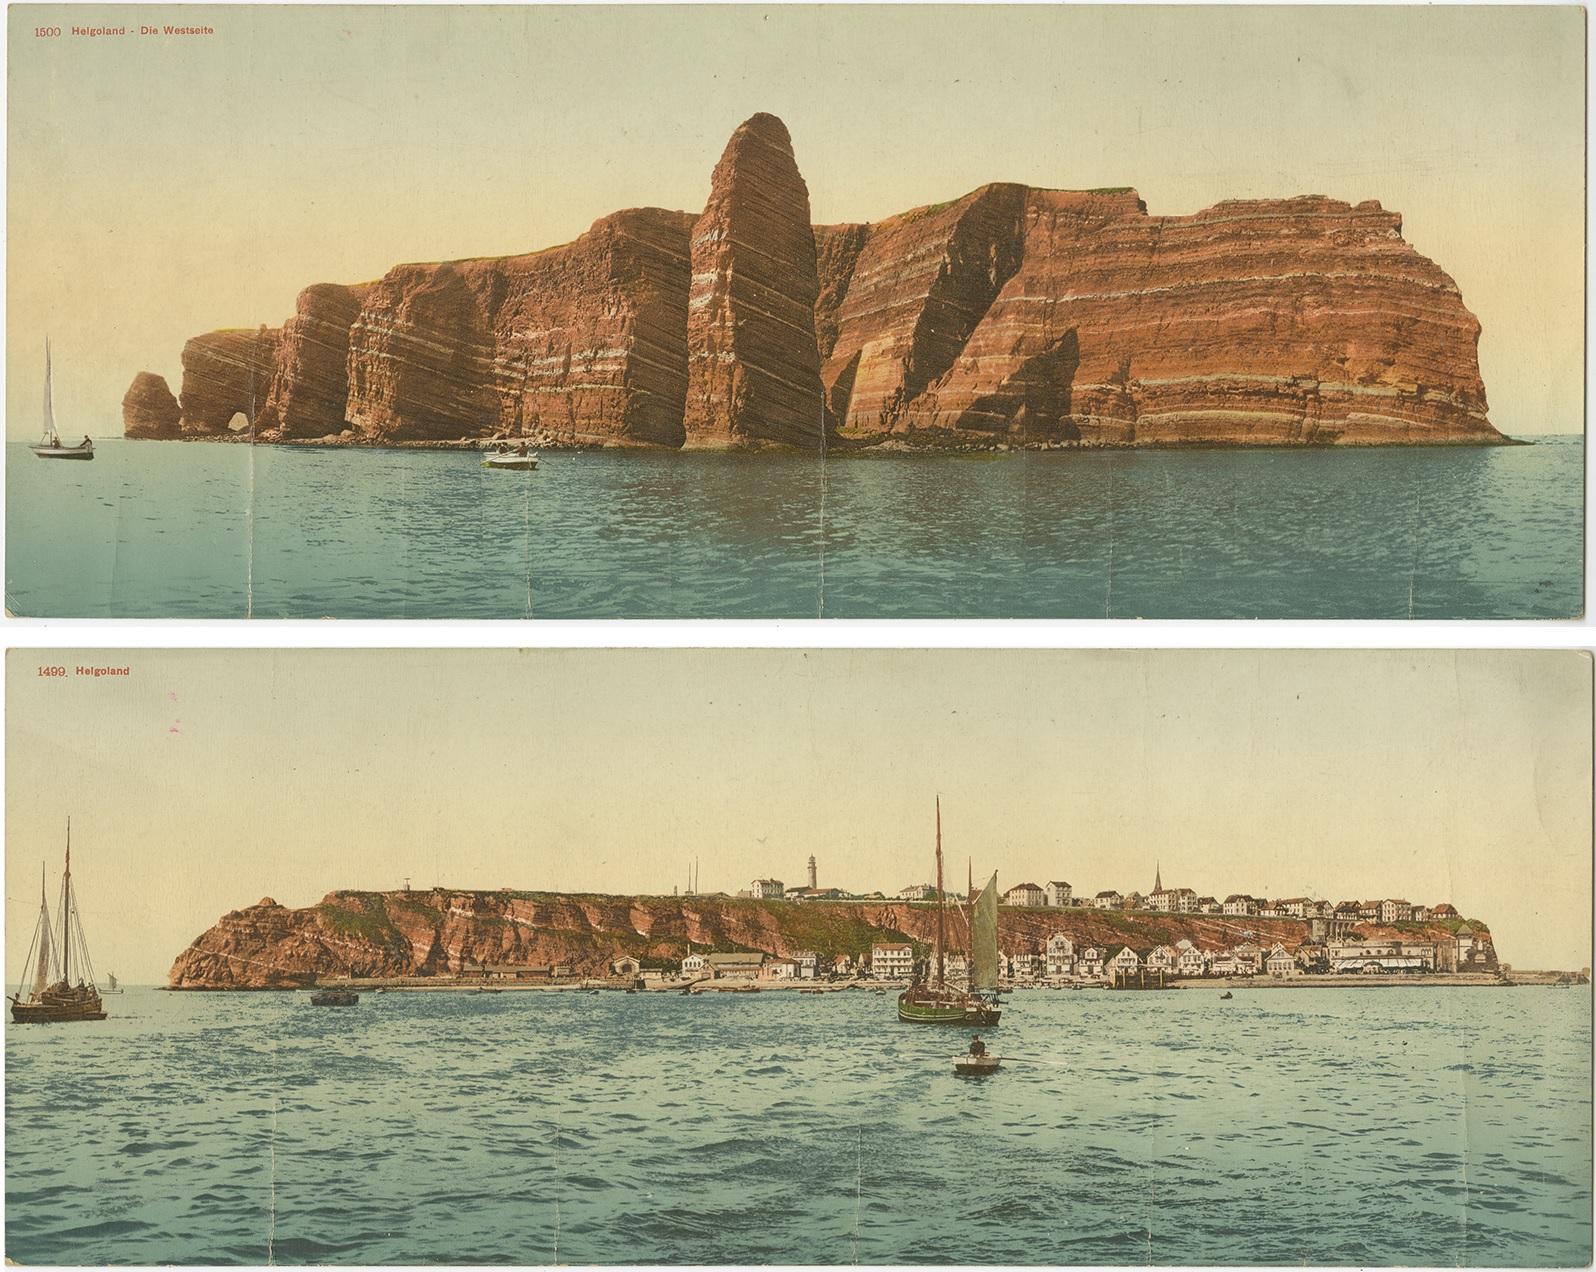 Set of two large panoramic postcards of Heligoland (Helgoland). Heligoland is a small archipelago in the North Sea. Published by F. Schensky.